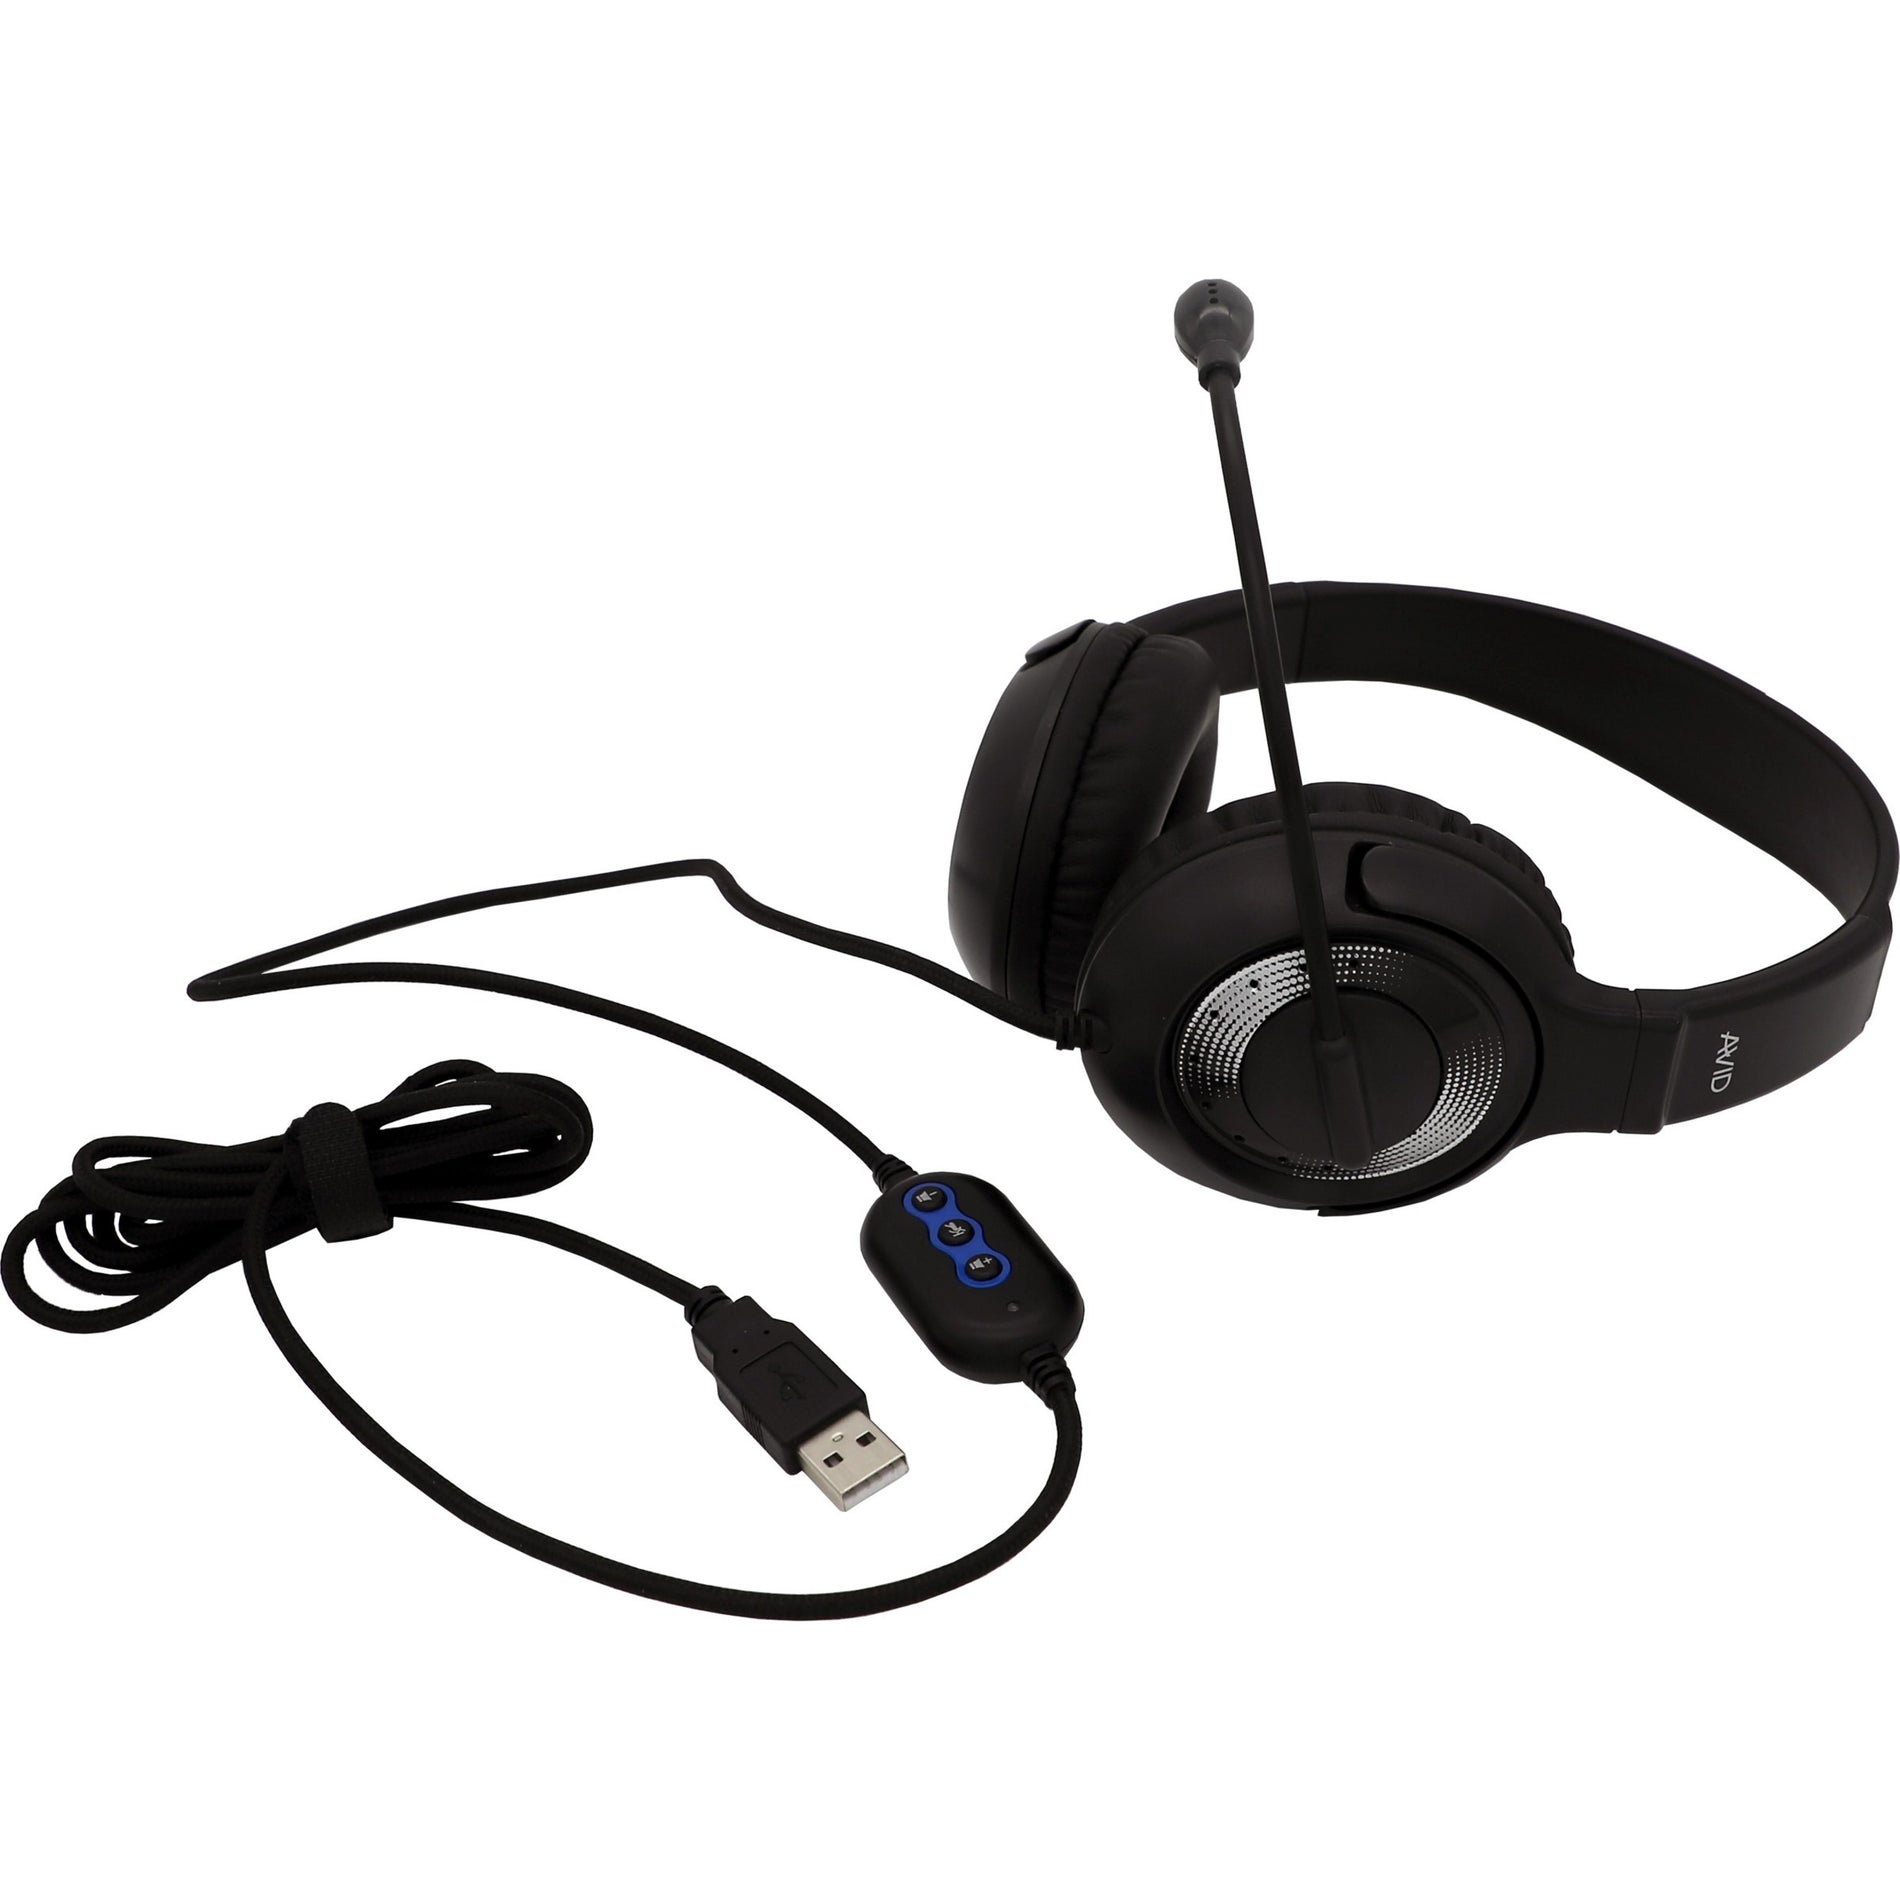 Avid Education 2AE55KLUSB AE-55 Headset, USB Wired Stereo Headset with Noise Cancelling Microphone